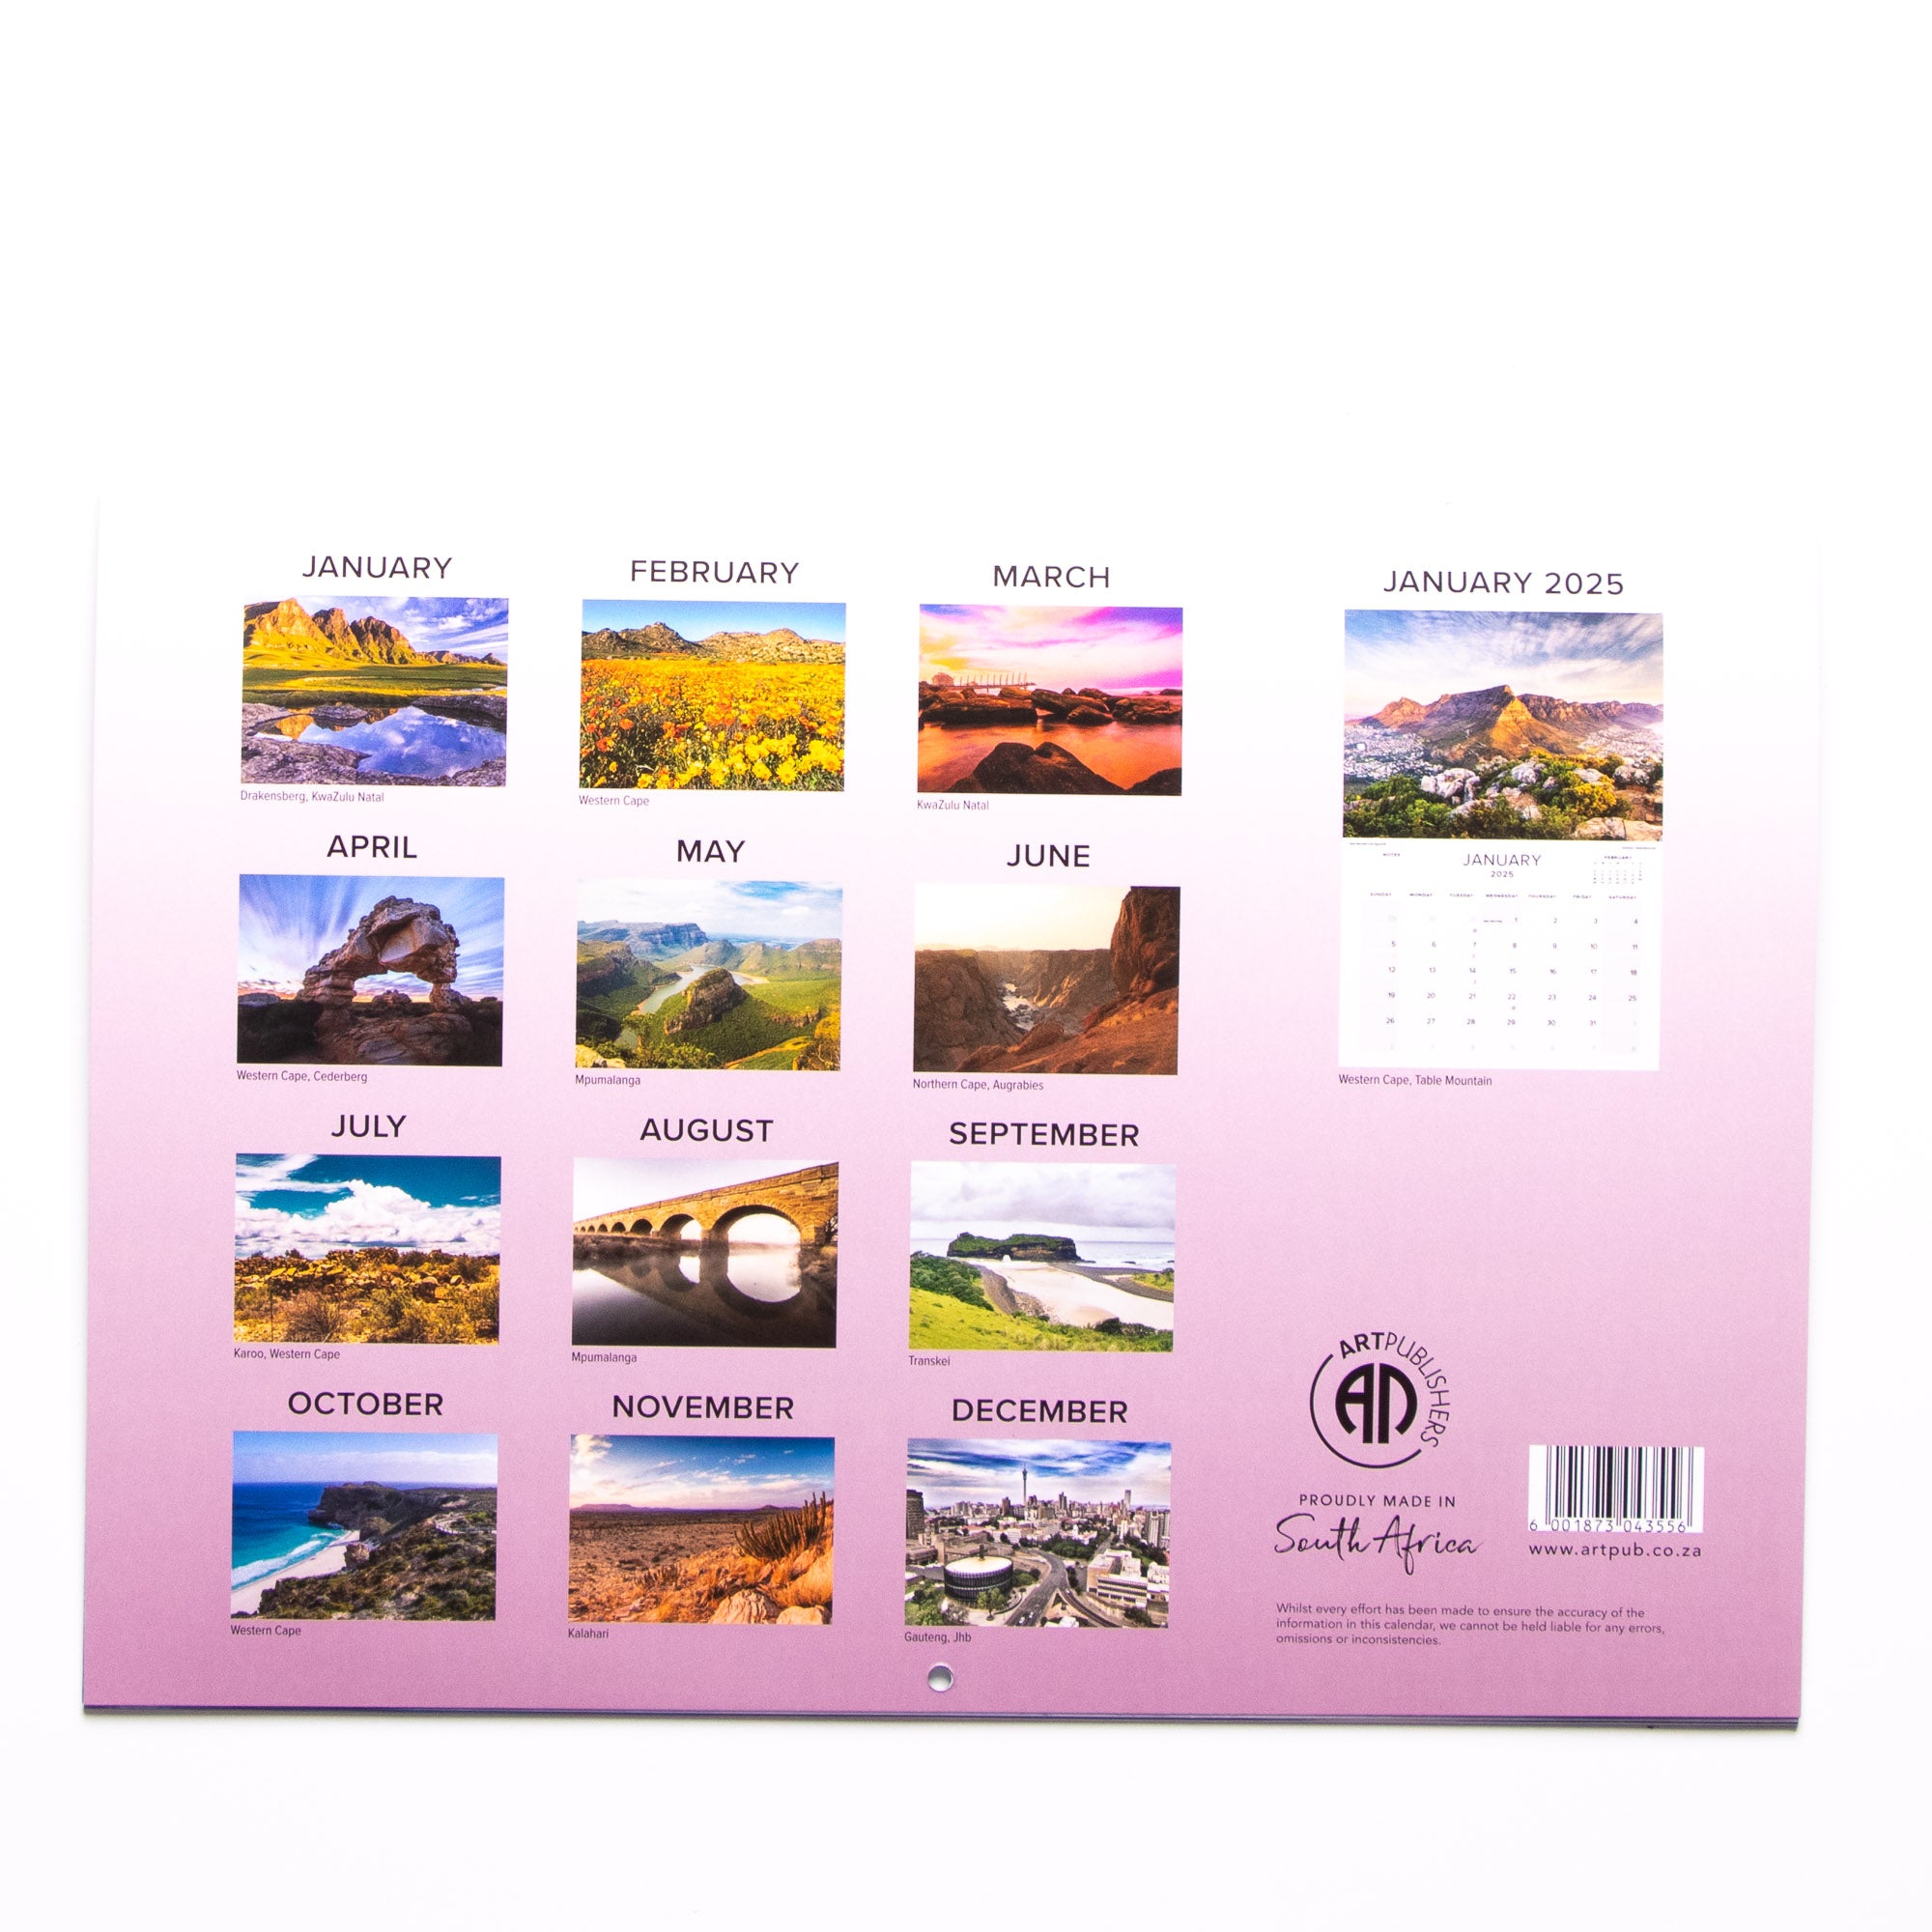 2024 South Africa Country of Africa Calendar -  Large